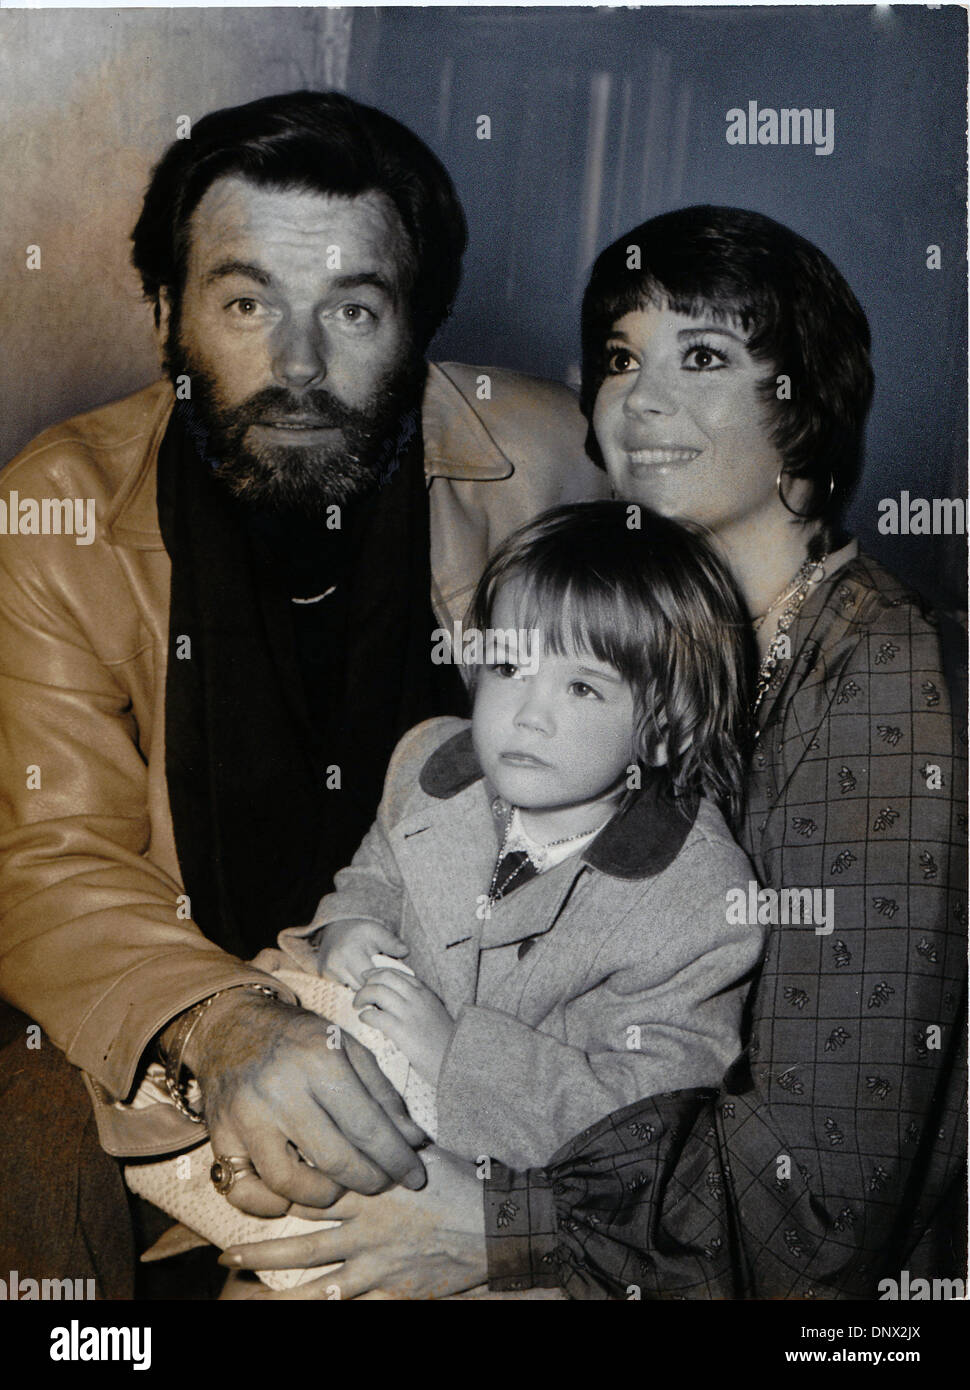 Dec. 27, 1973 - Saint-Paul, France -NATALIE WOOD (July 20, 1938 - November 29, 1981) was an award winning American actress. PICTURED: Wood on vacation with her husband ROBERT WAGNER and their daughter COURTNEY WAGNER. (Credit Image: © KEYSTONE Pictures USA/ZUMAPRESS.com) Stock Photo